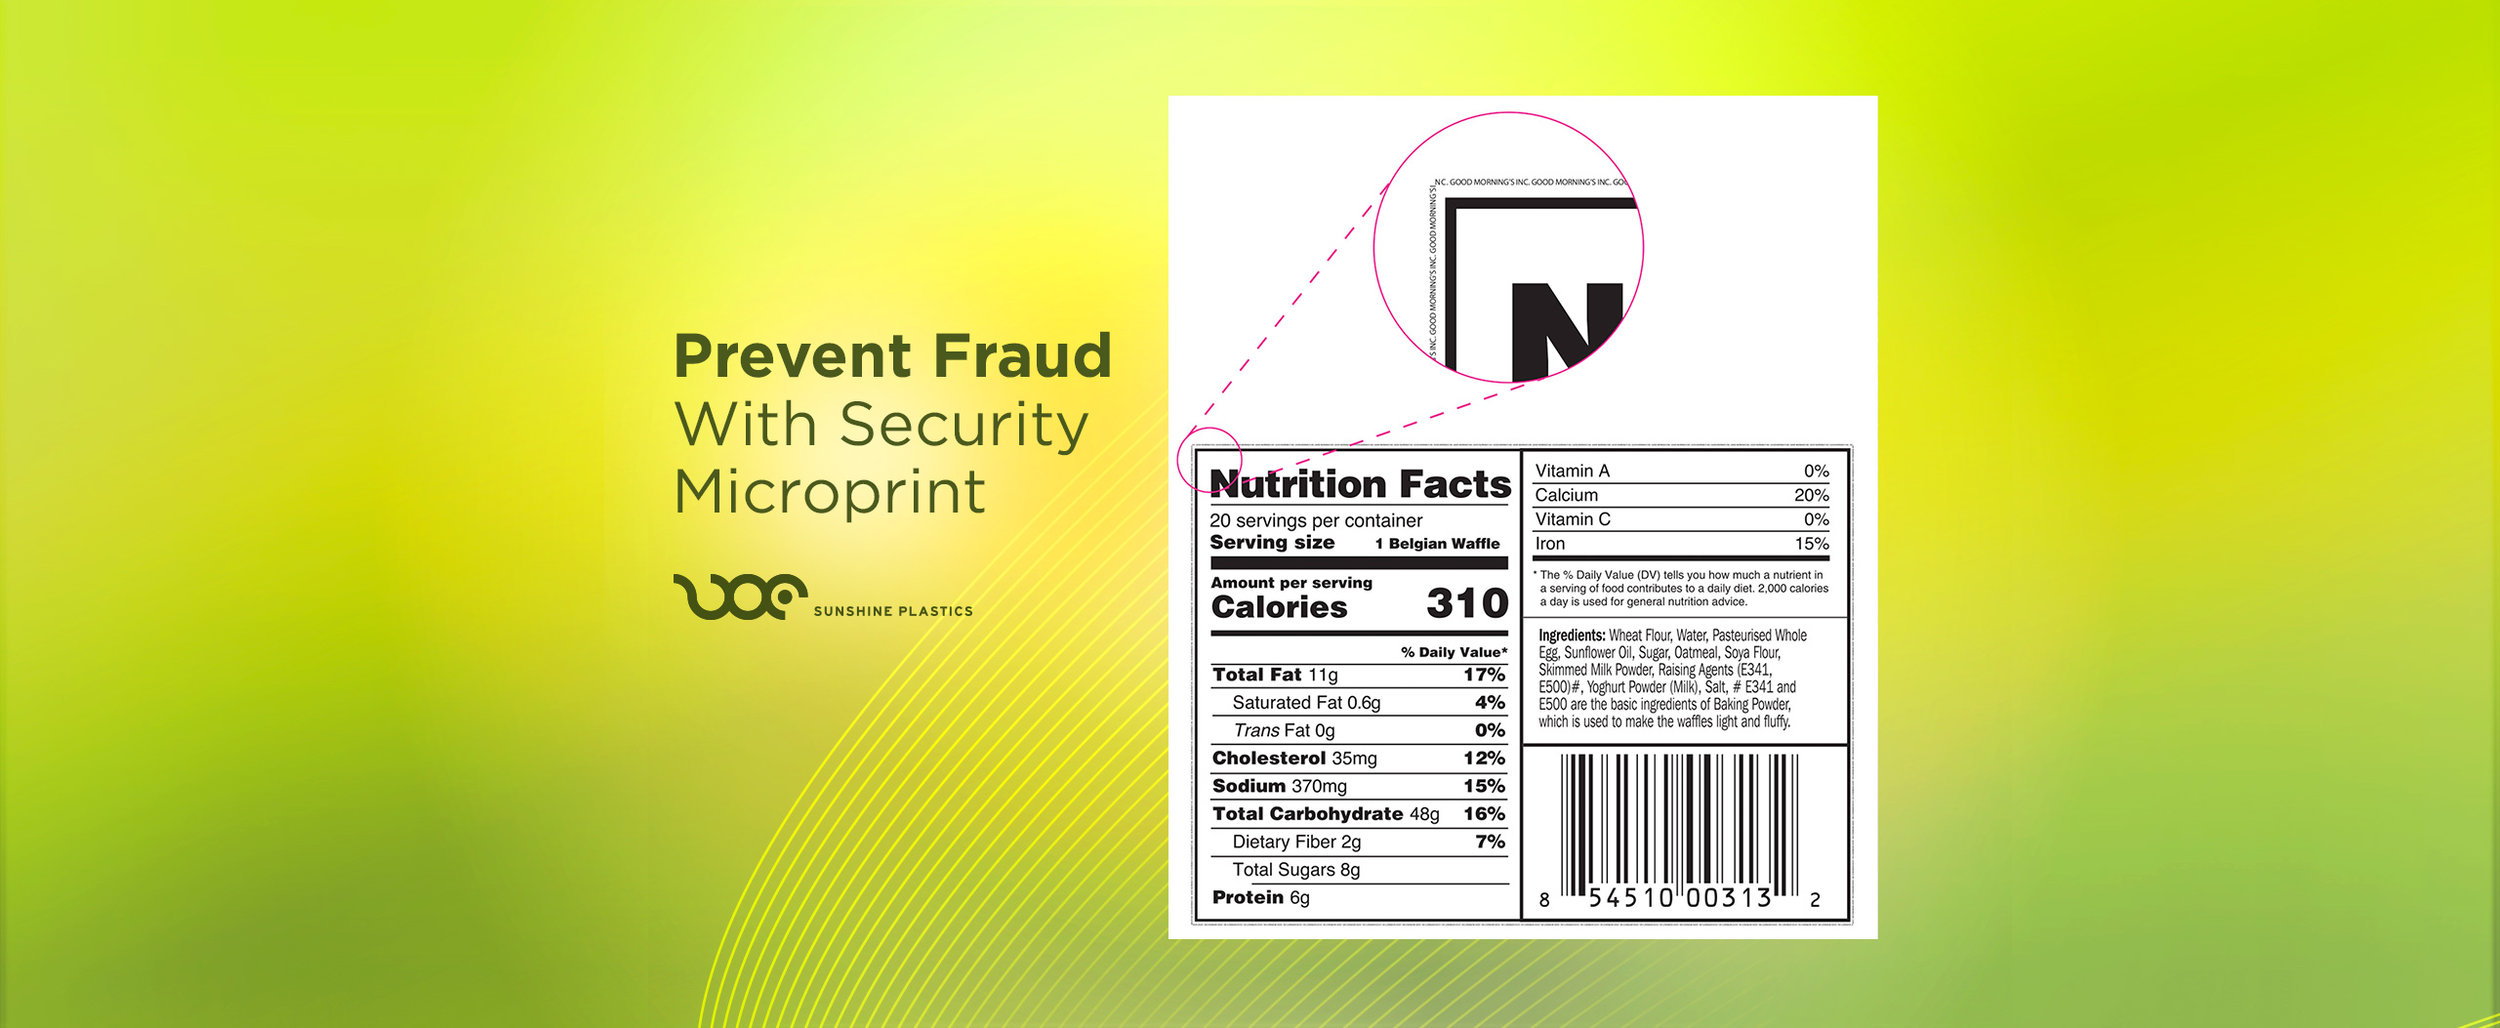 Prevent fraud with security microprint. Image shows product label with the microprint. 